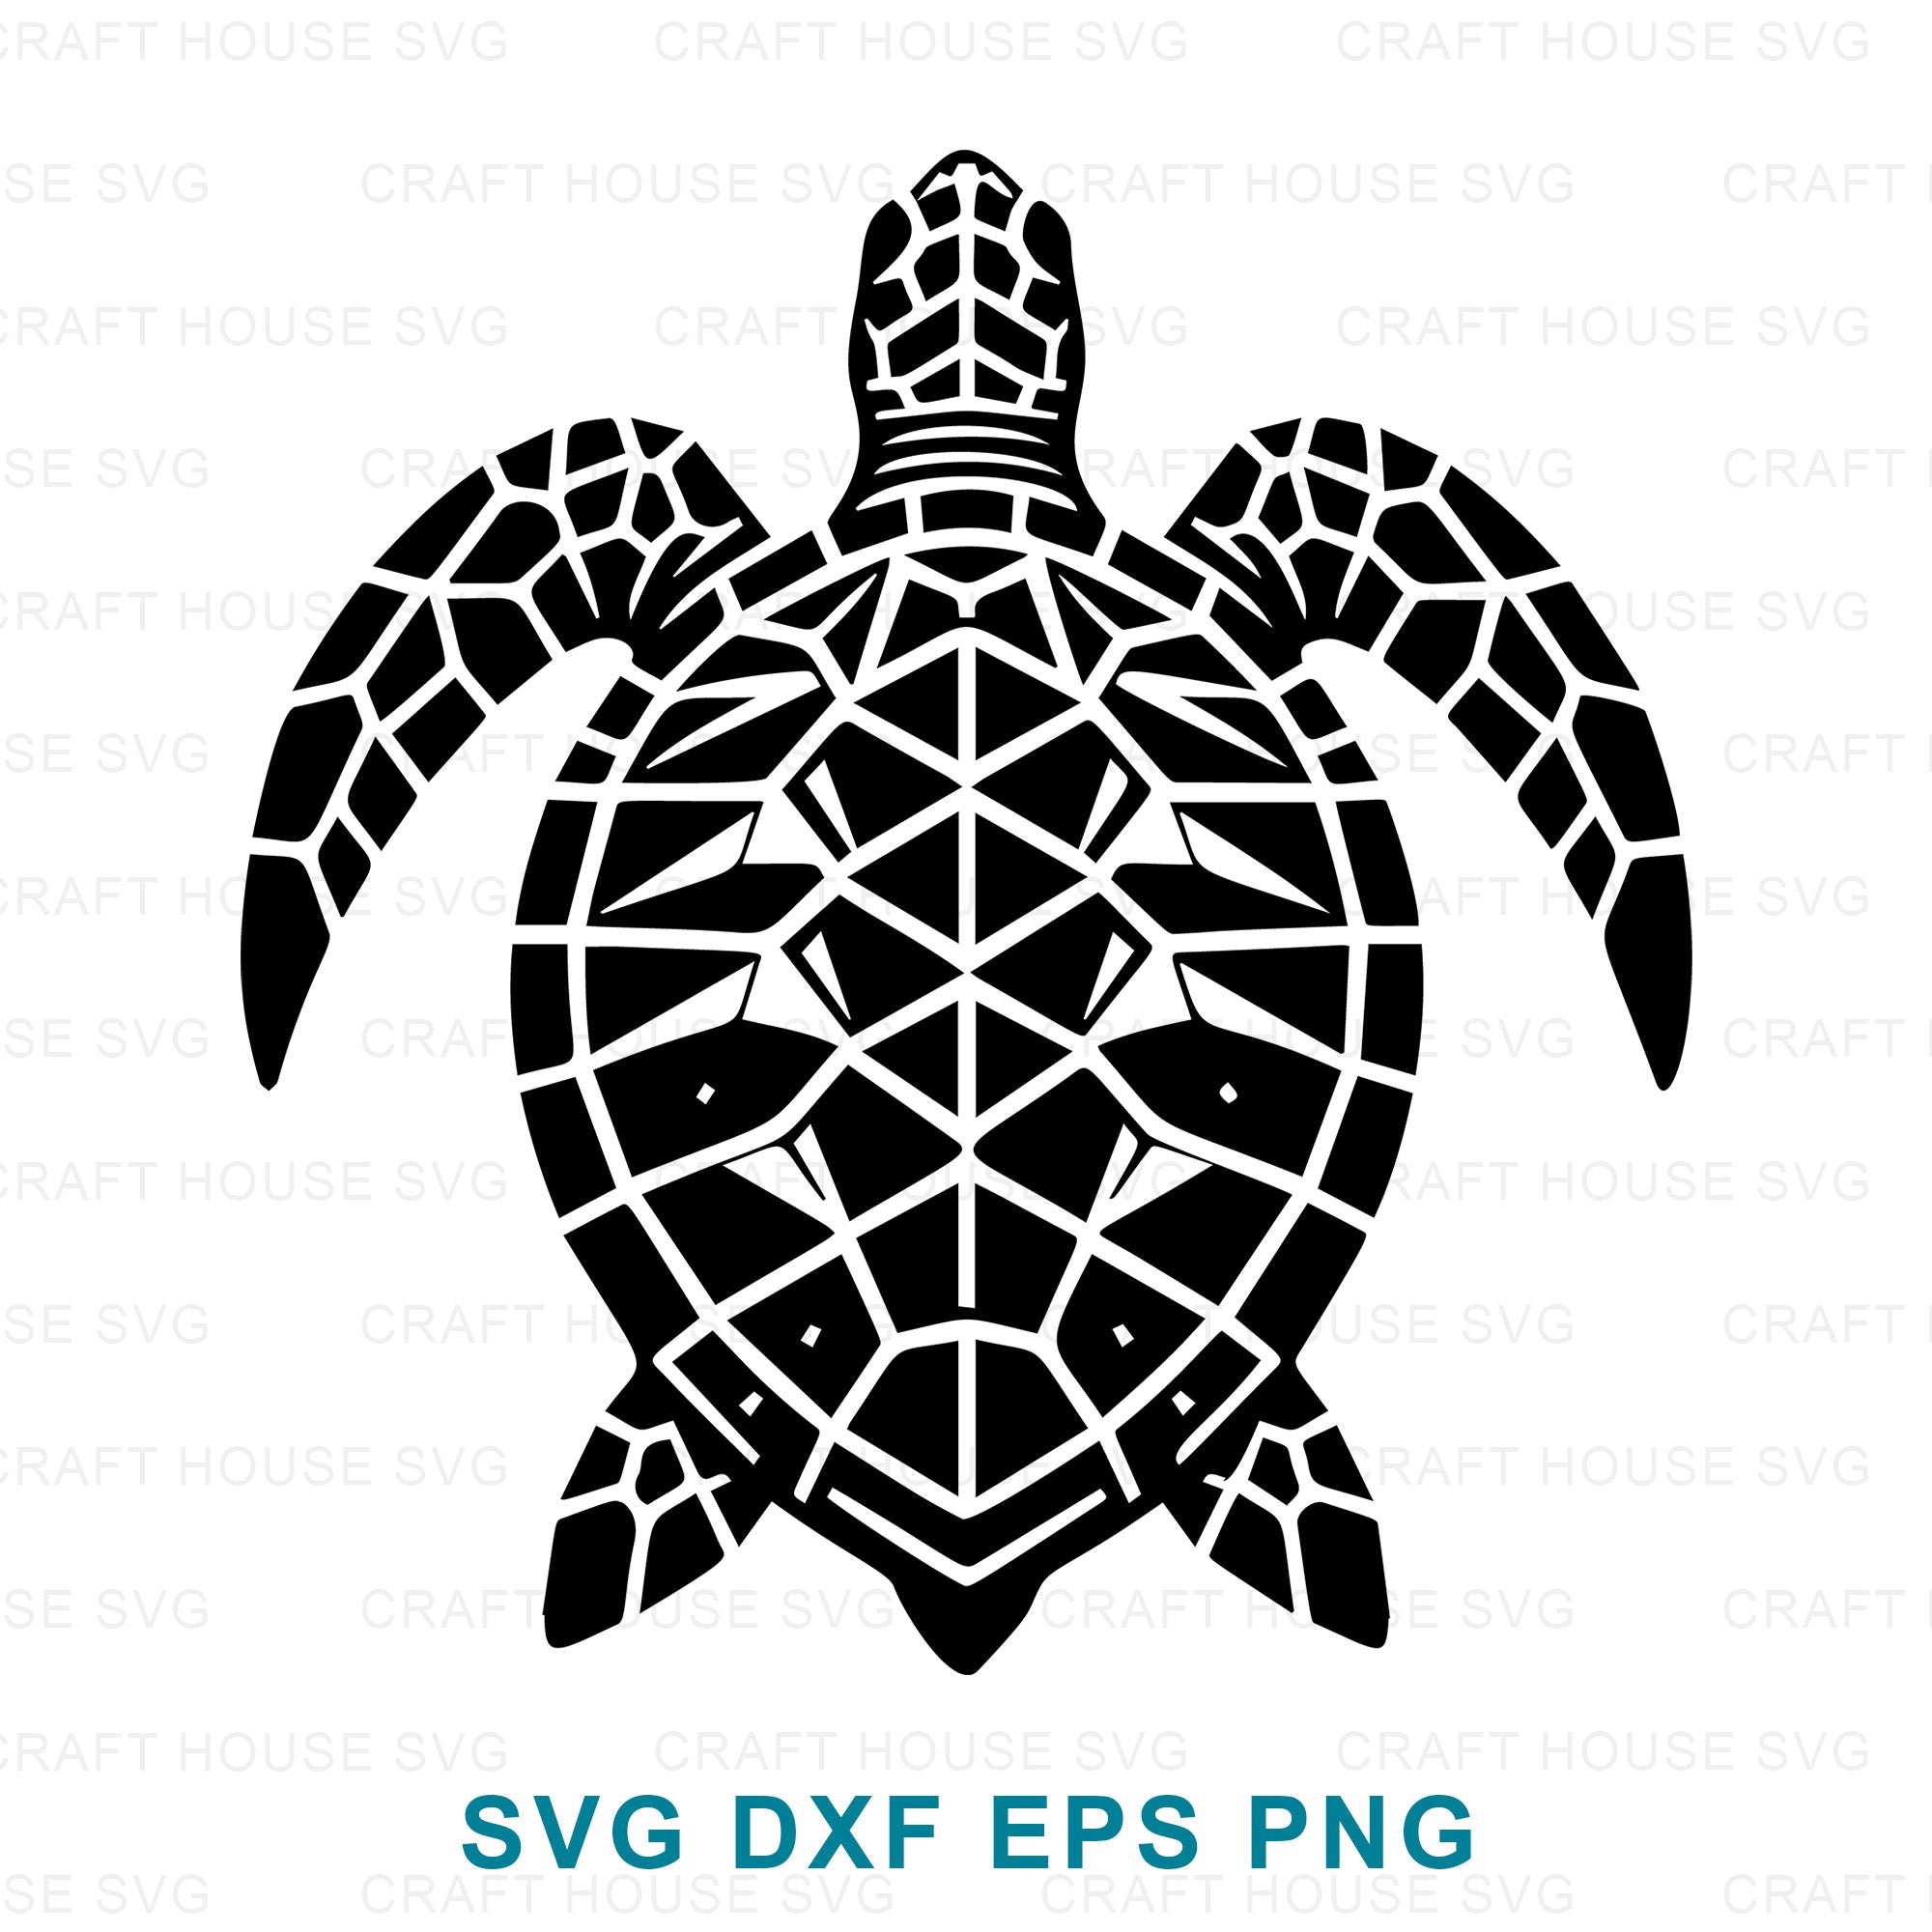 Sea Turtle SVG DXF EPS PNG